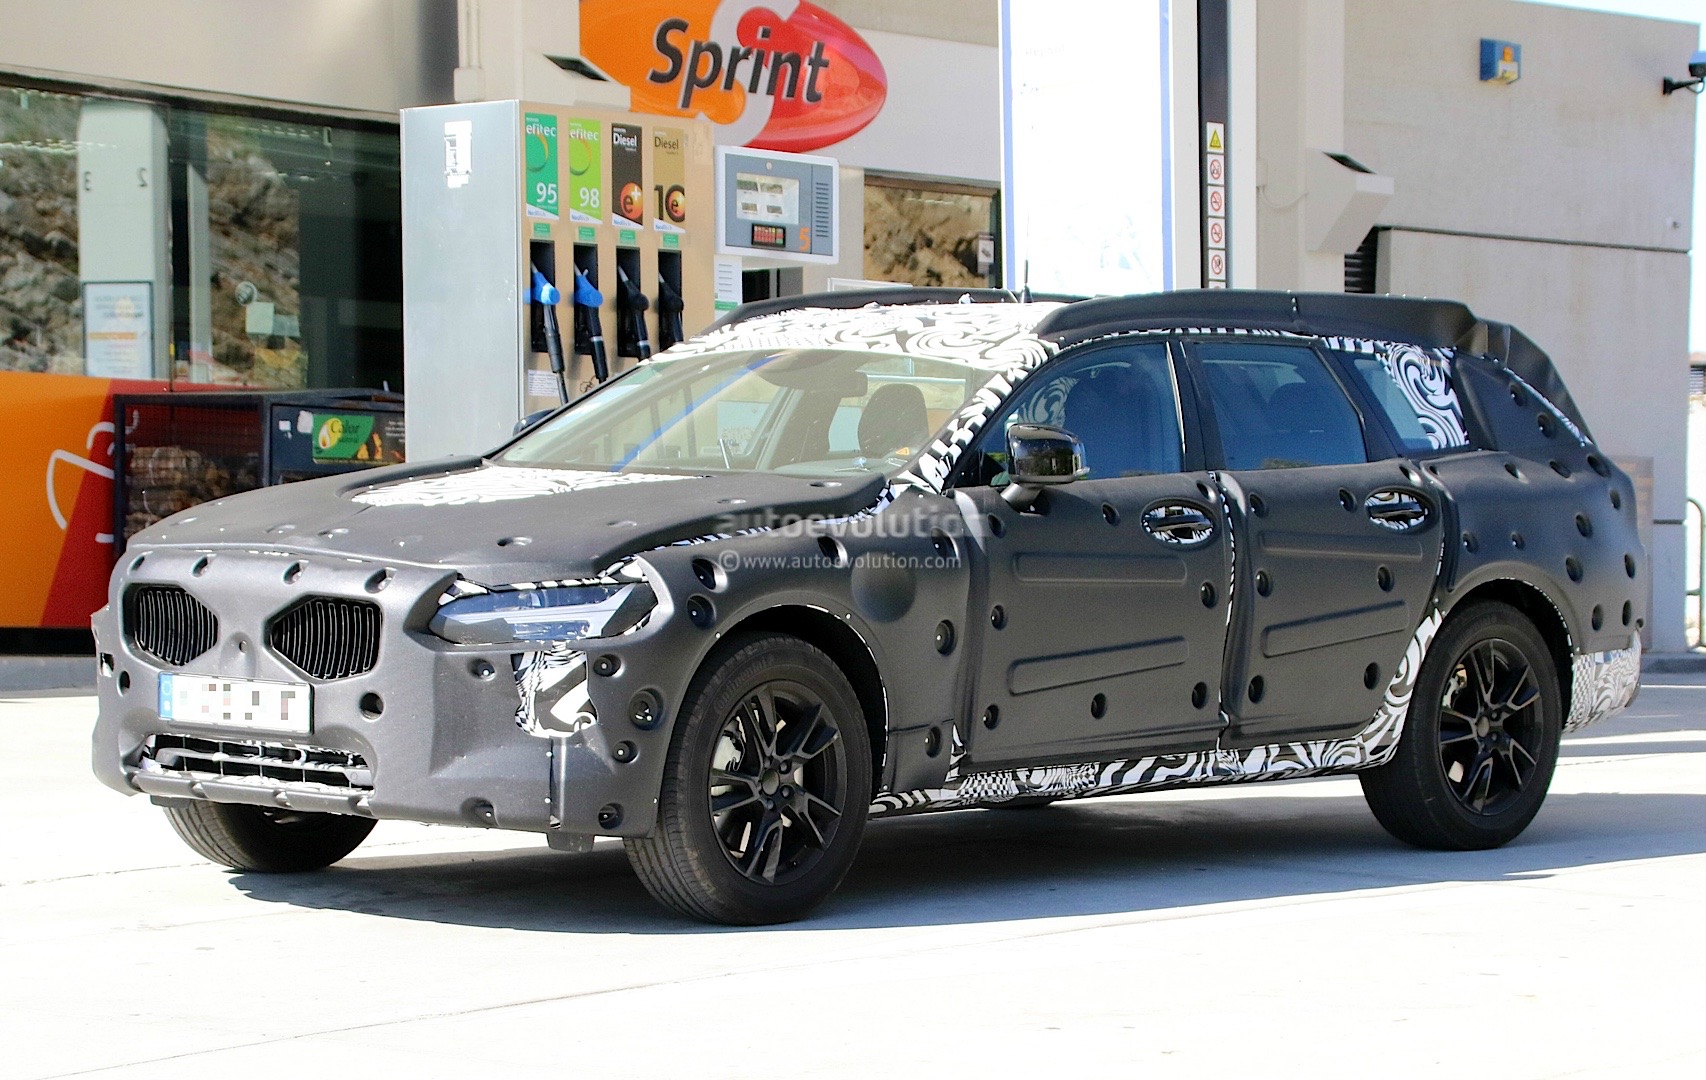 2017-volvo-v90-cross-country-spied-stands-high-off-the-ground-108105_1.jpg